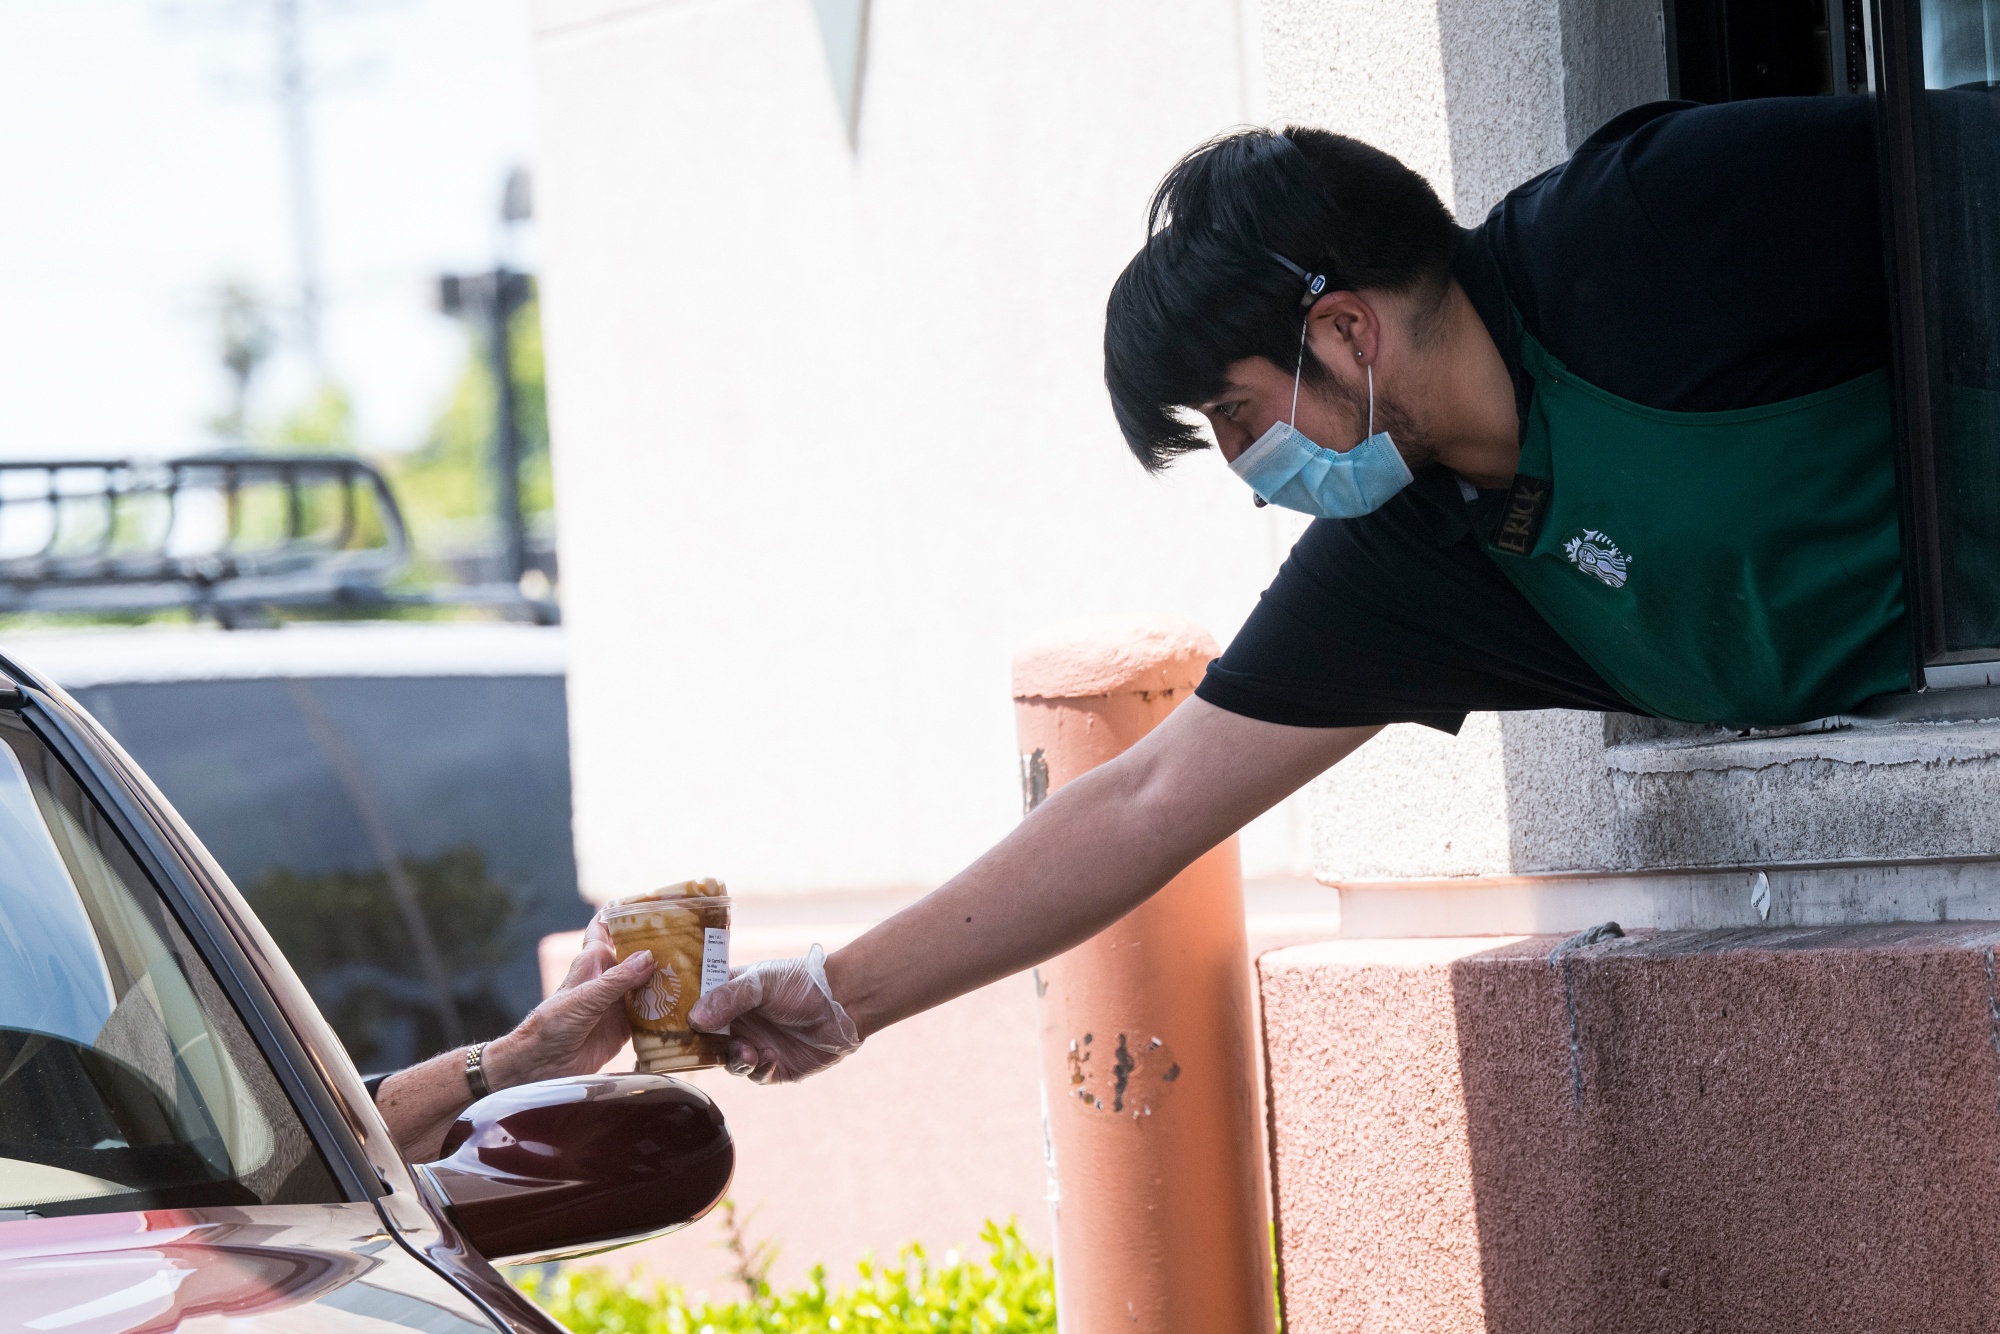 Why many Starbucks fans are angry over new rewards program